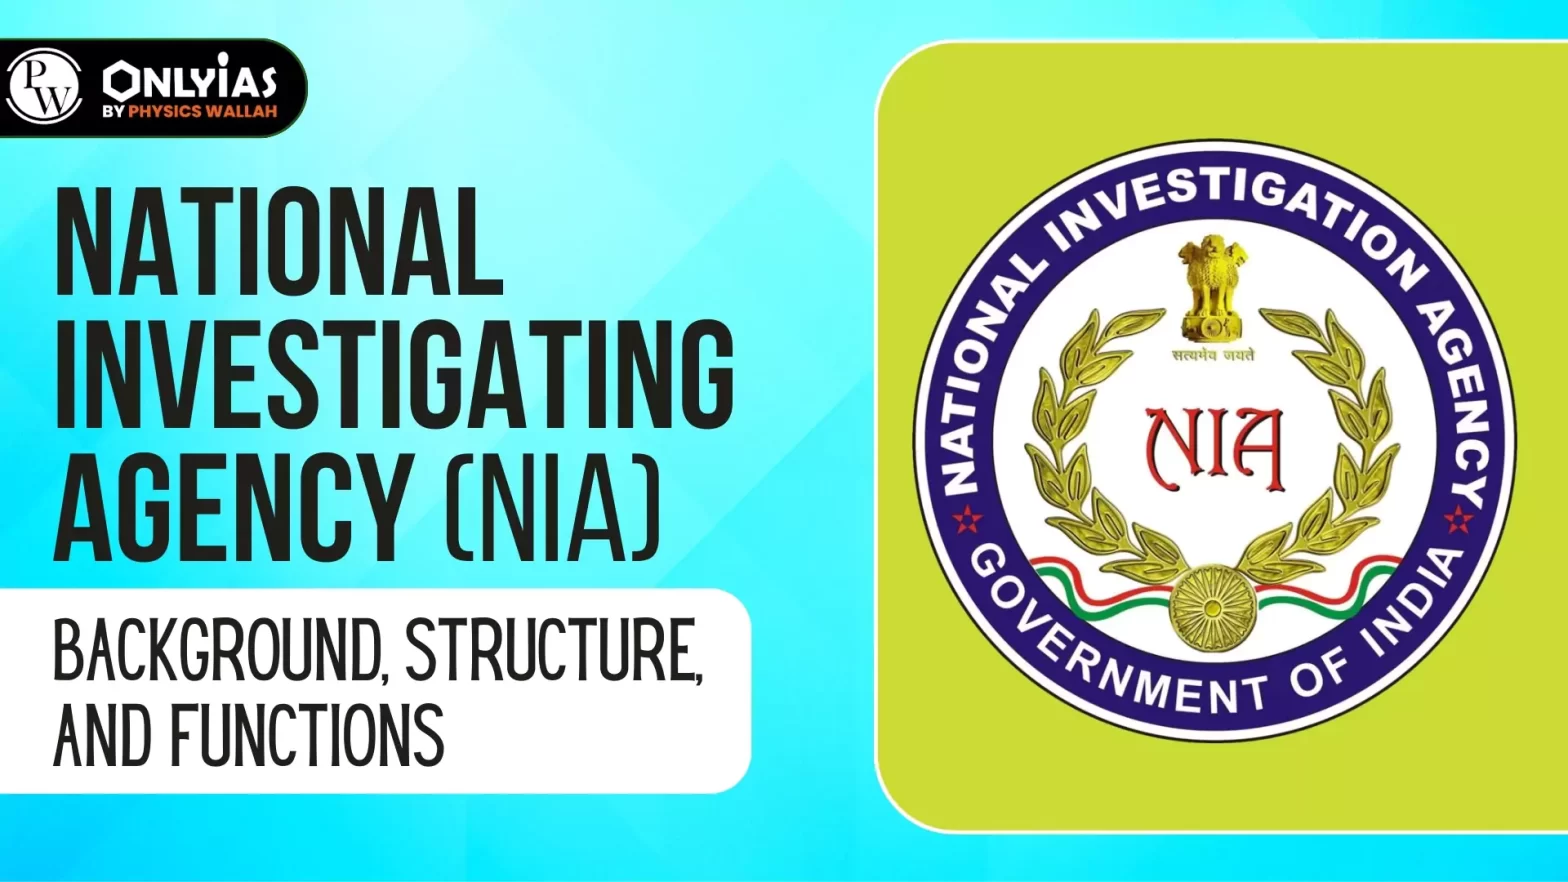 National Investigating Agency (NIA): Background, Structure, and Functions